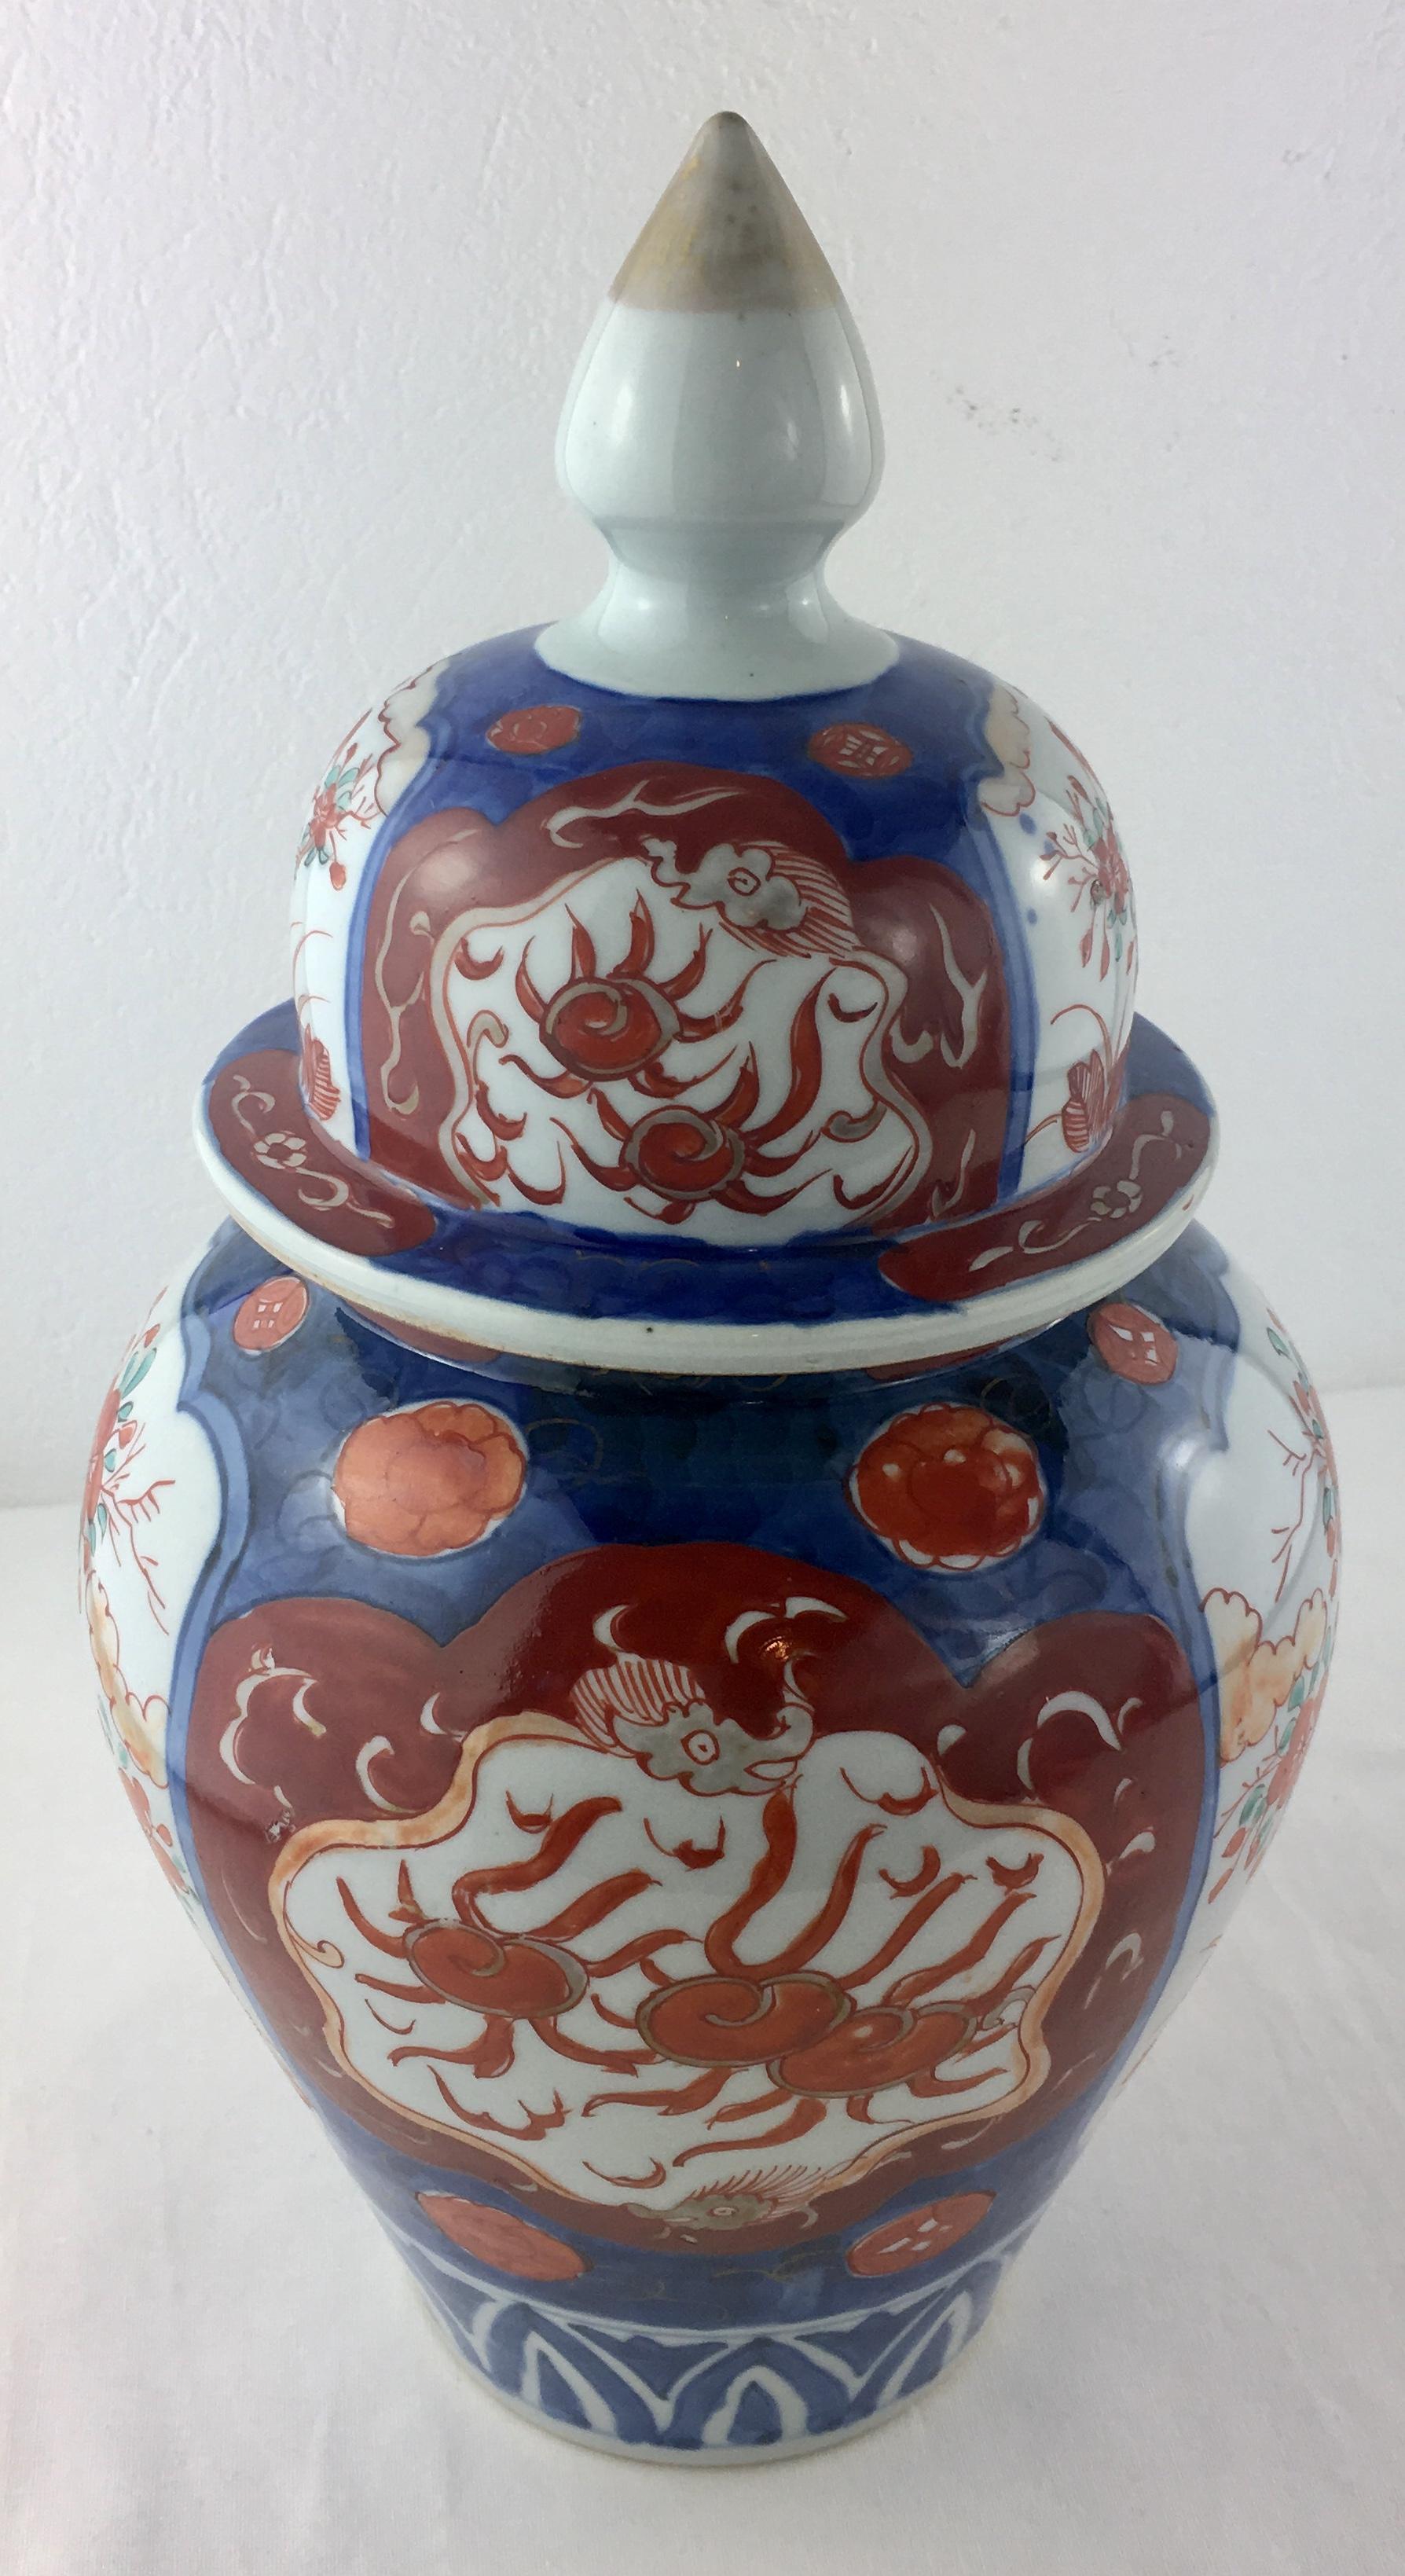 19th century Japanese Imari lidded vase one side has phoenix and ikebana flowers hand painted in great detail throughout. 

Colors from natural pigment glazes.
Beautiful patina. 

Very good antique condition. 
Measures: 12